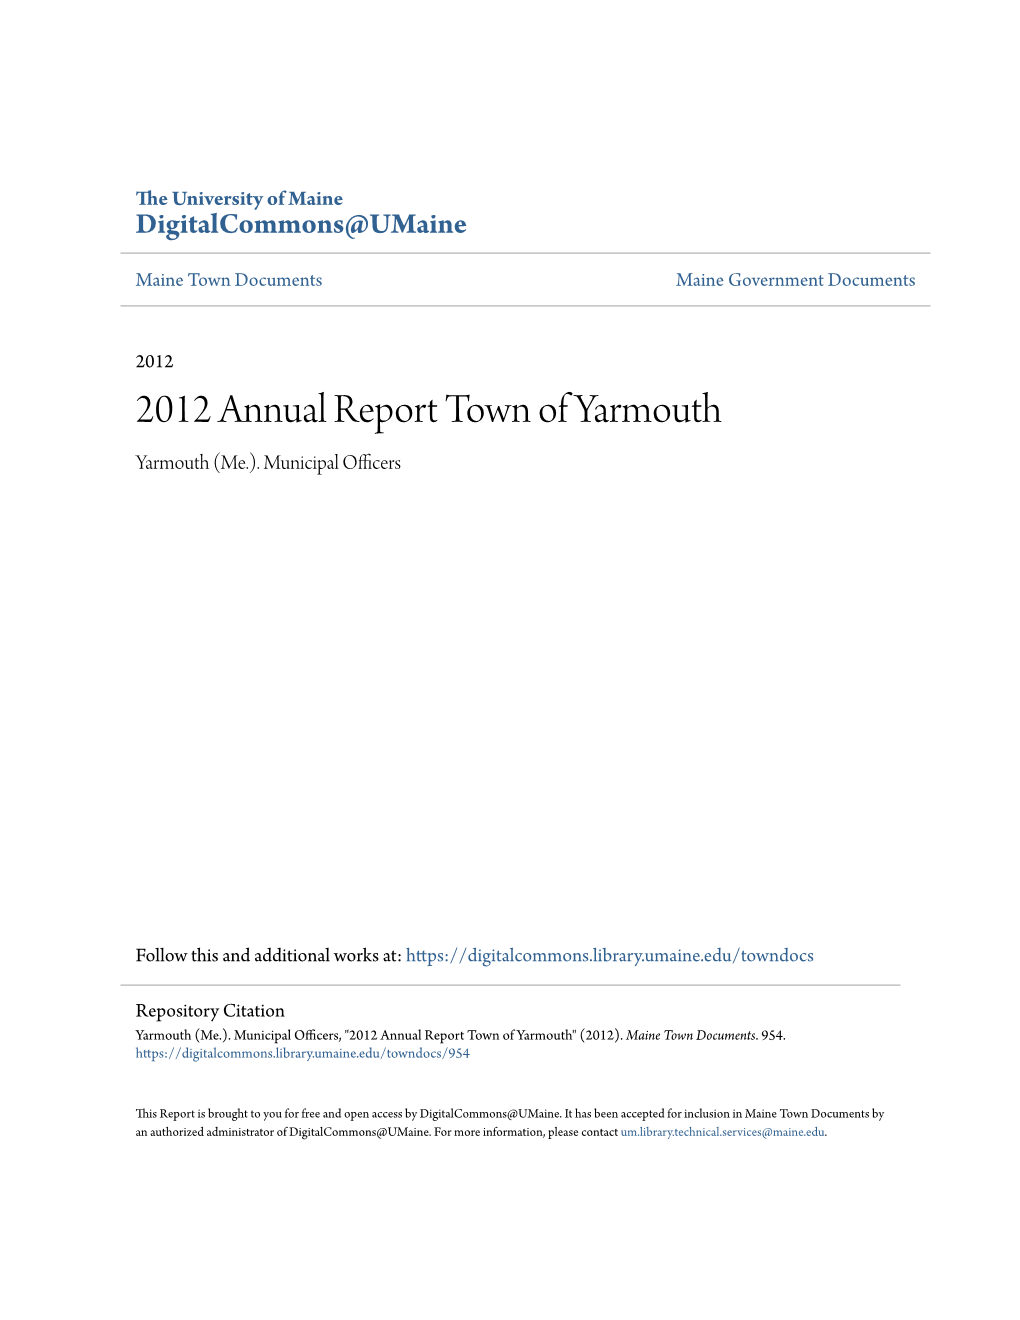 2012 Annual Report Town of Yarmouth Yarmouth (Me.)